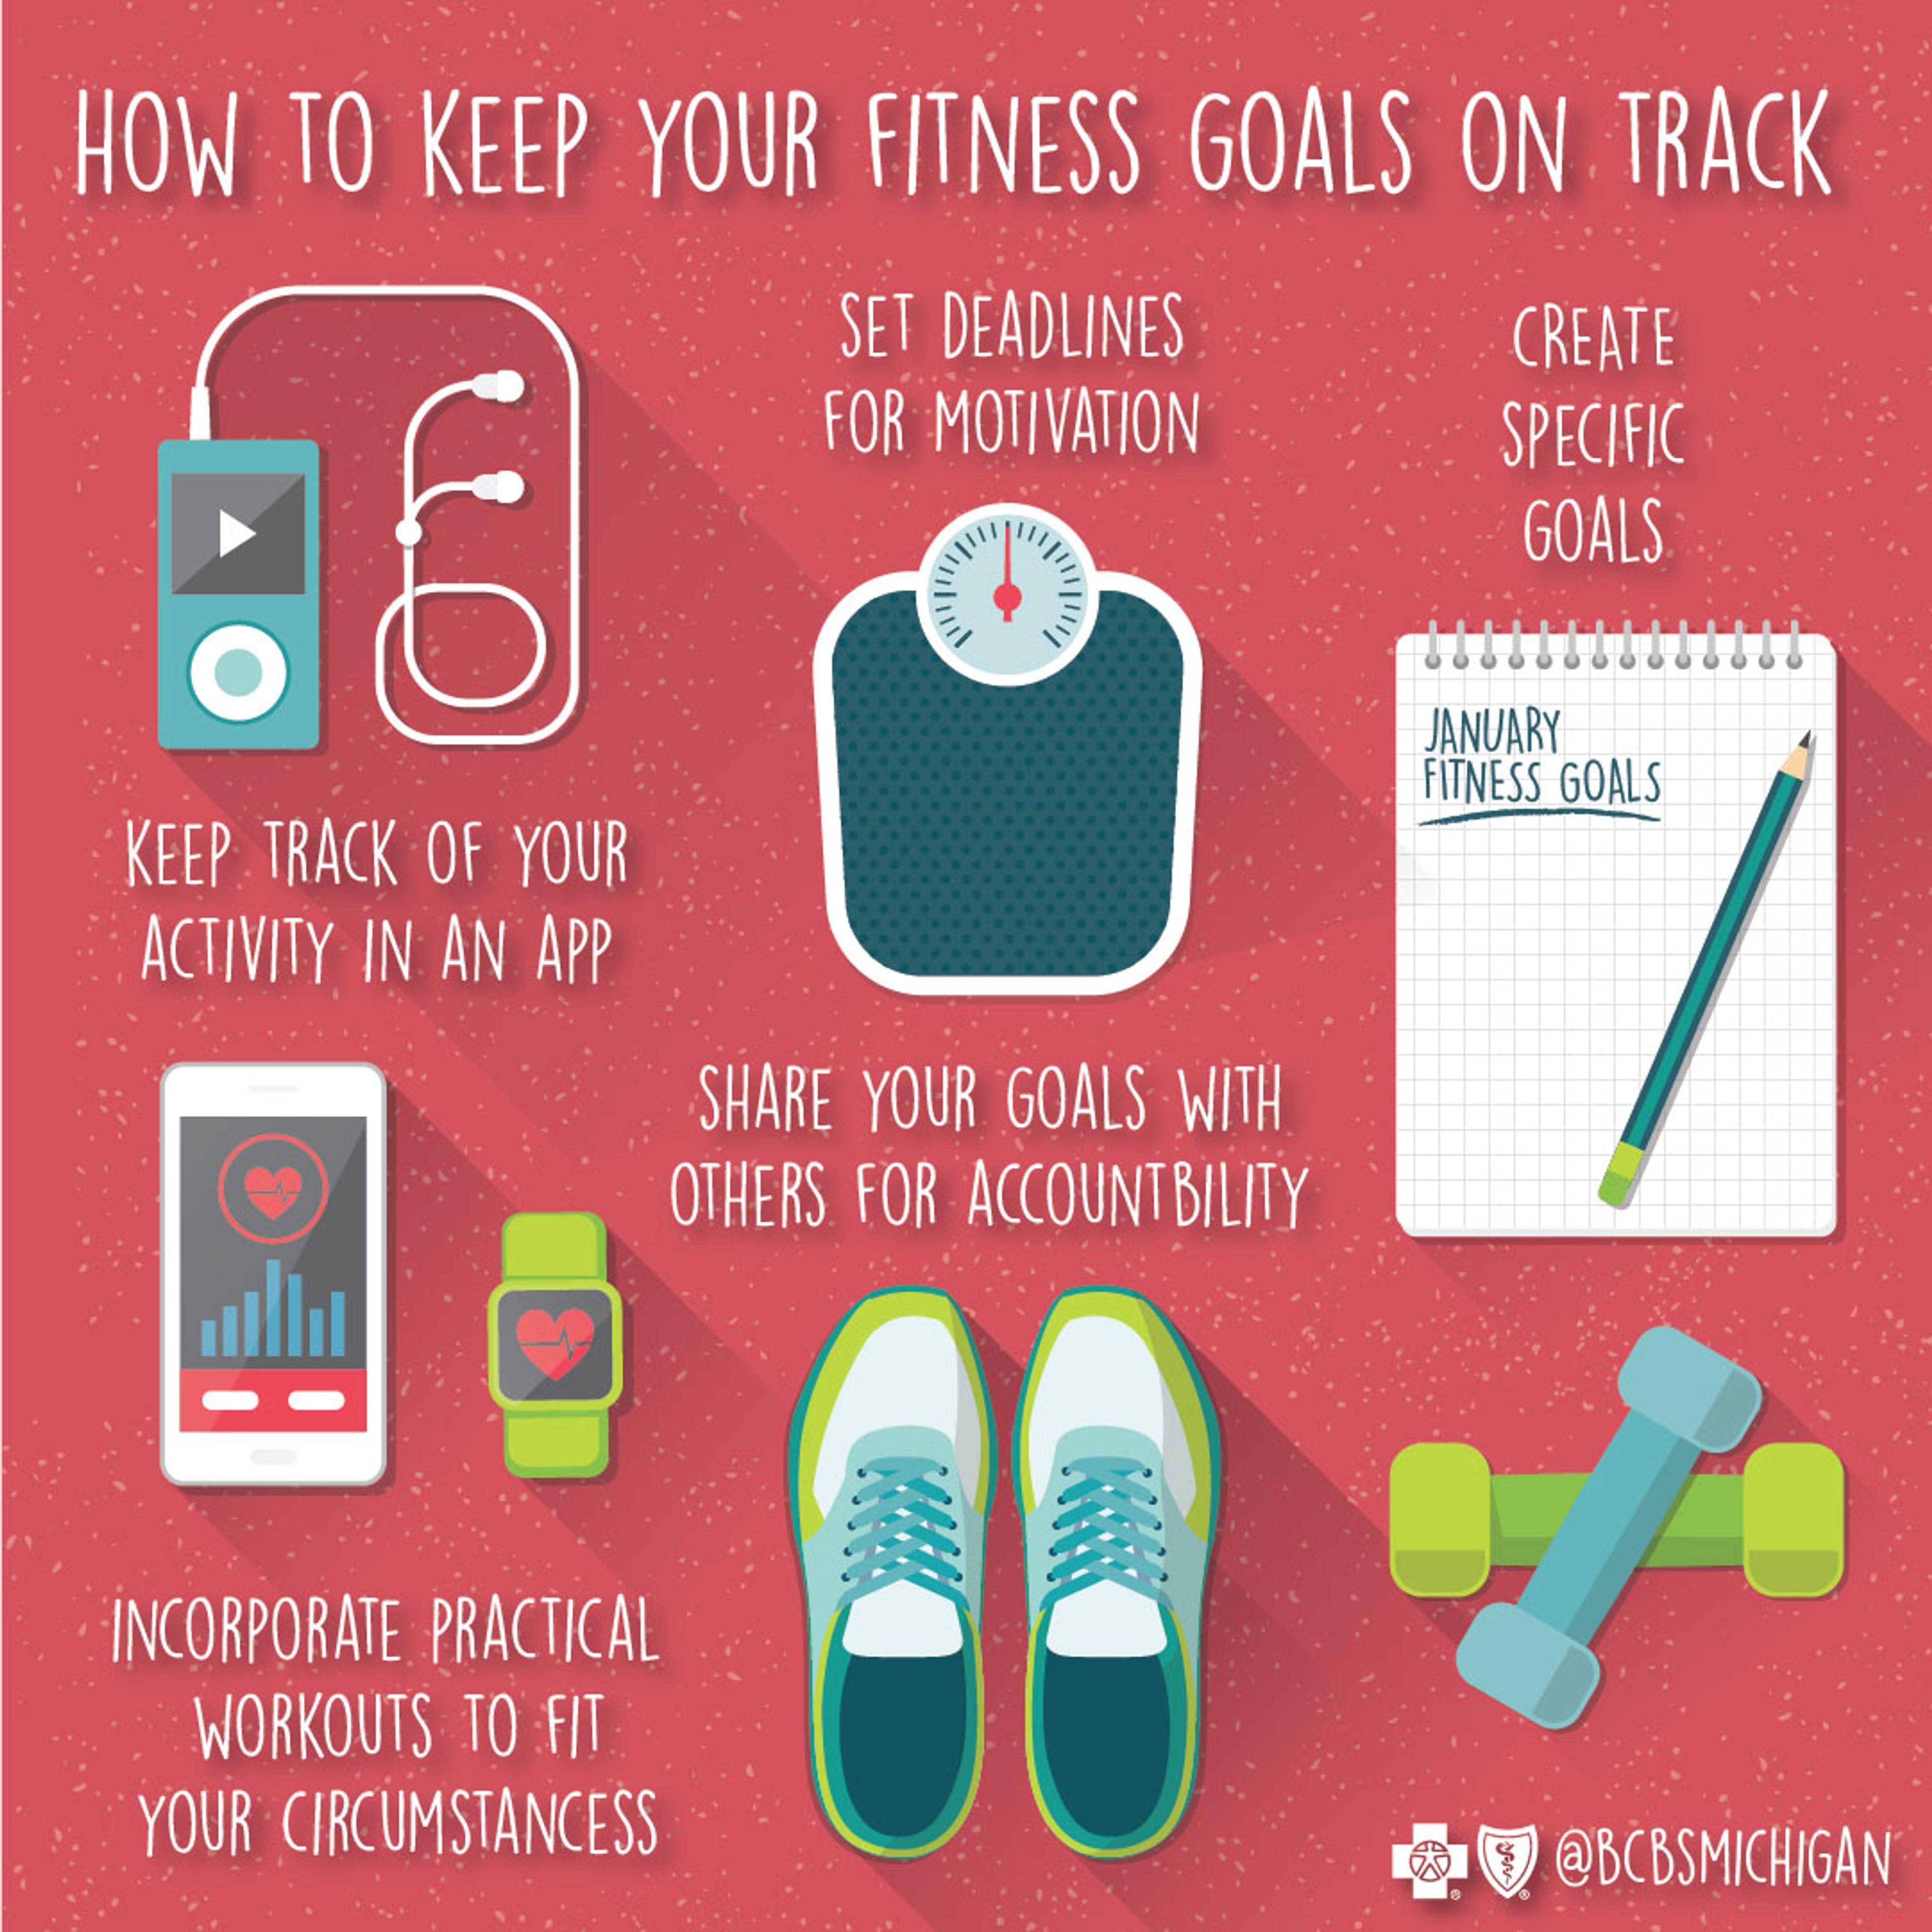 How to Structure a Workout to Meet Your Fitness Goals